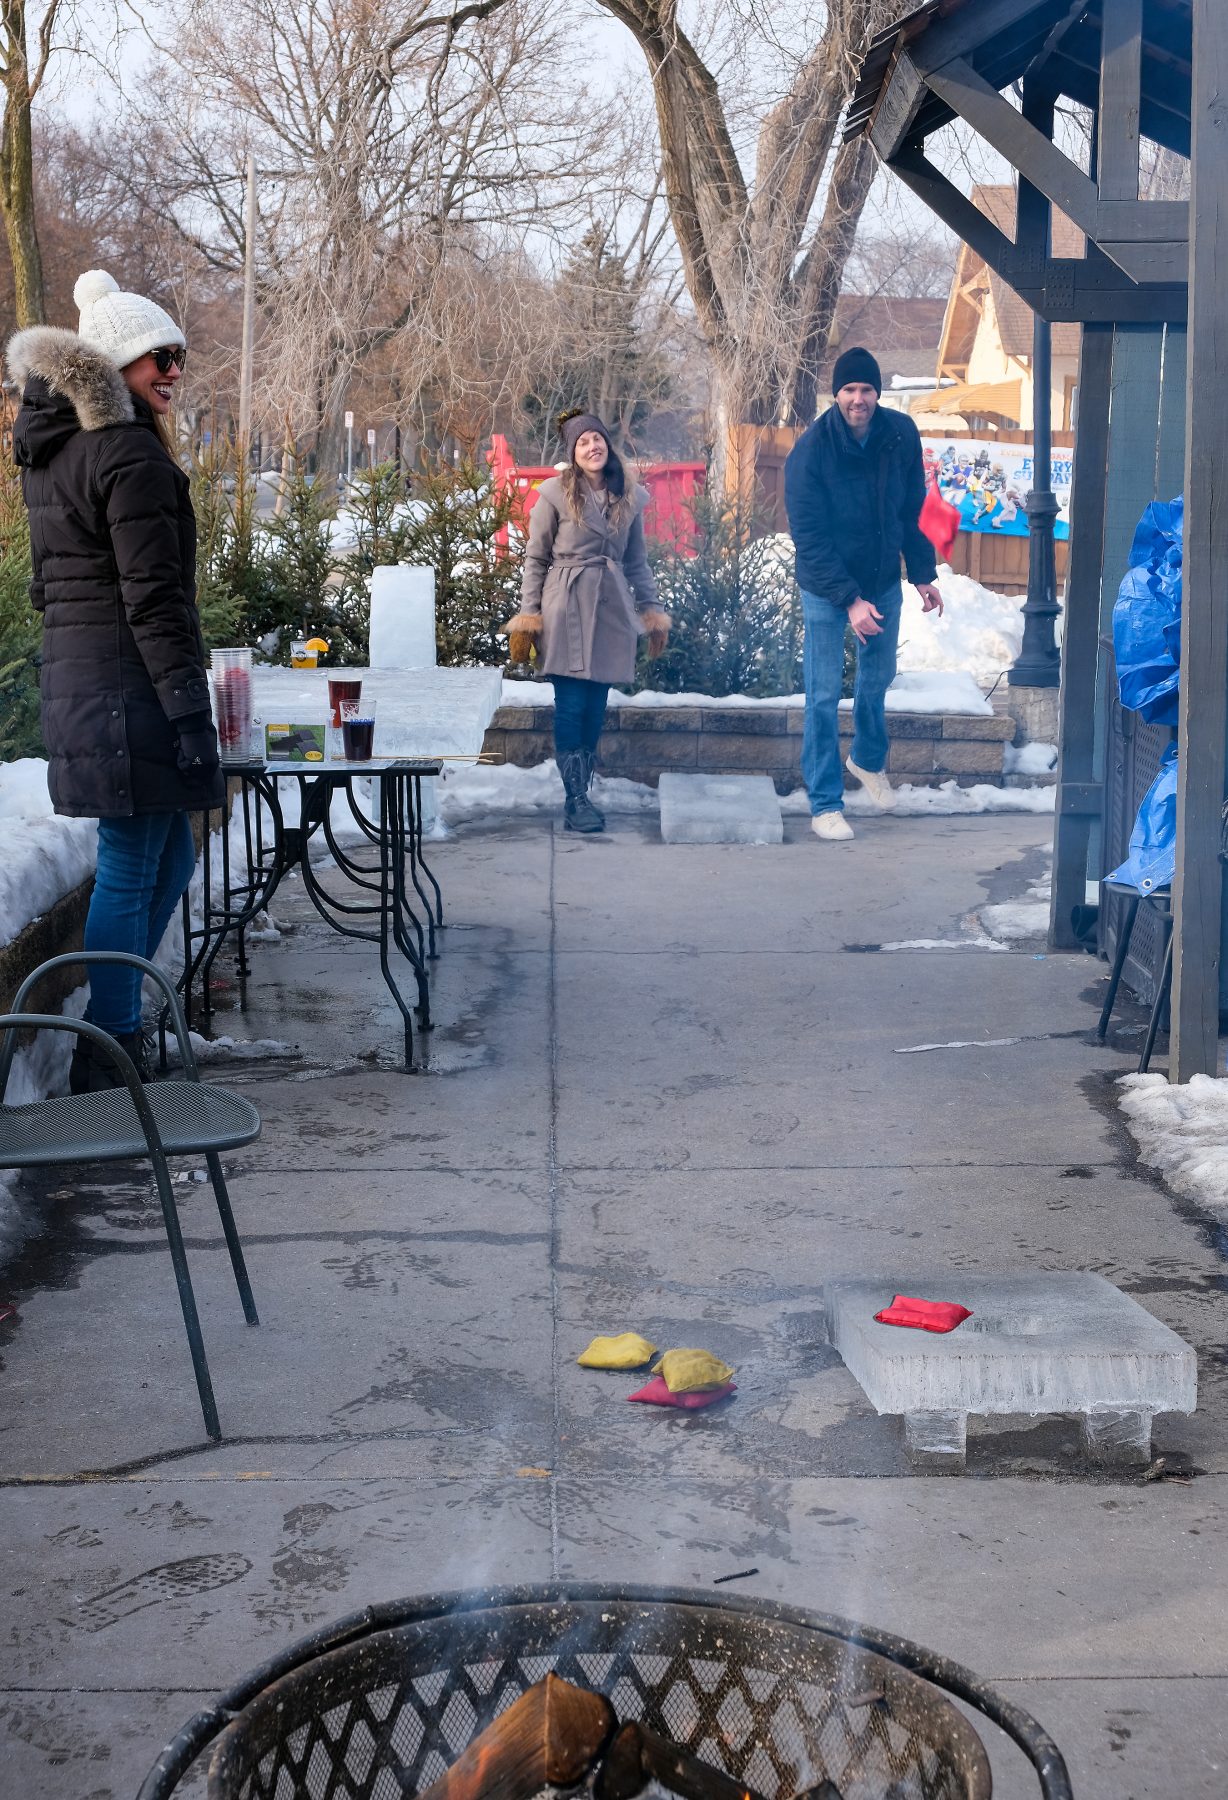 People outside in winter garb playing bean bag toss on a cement patio